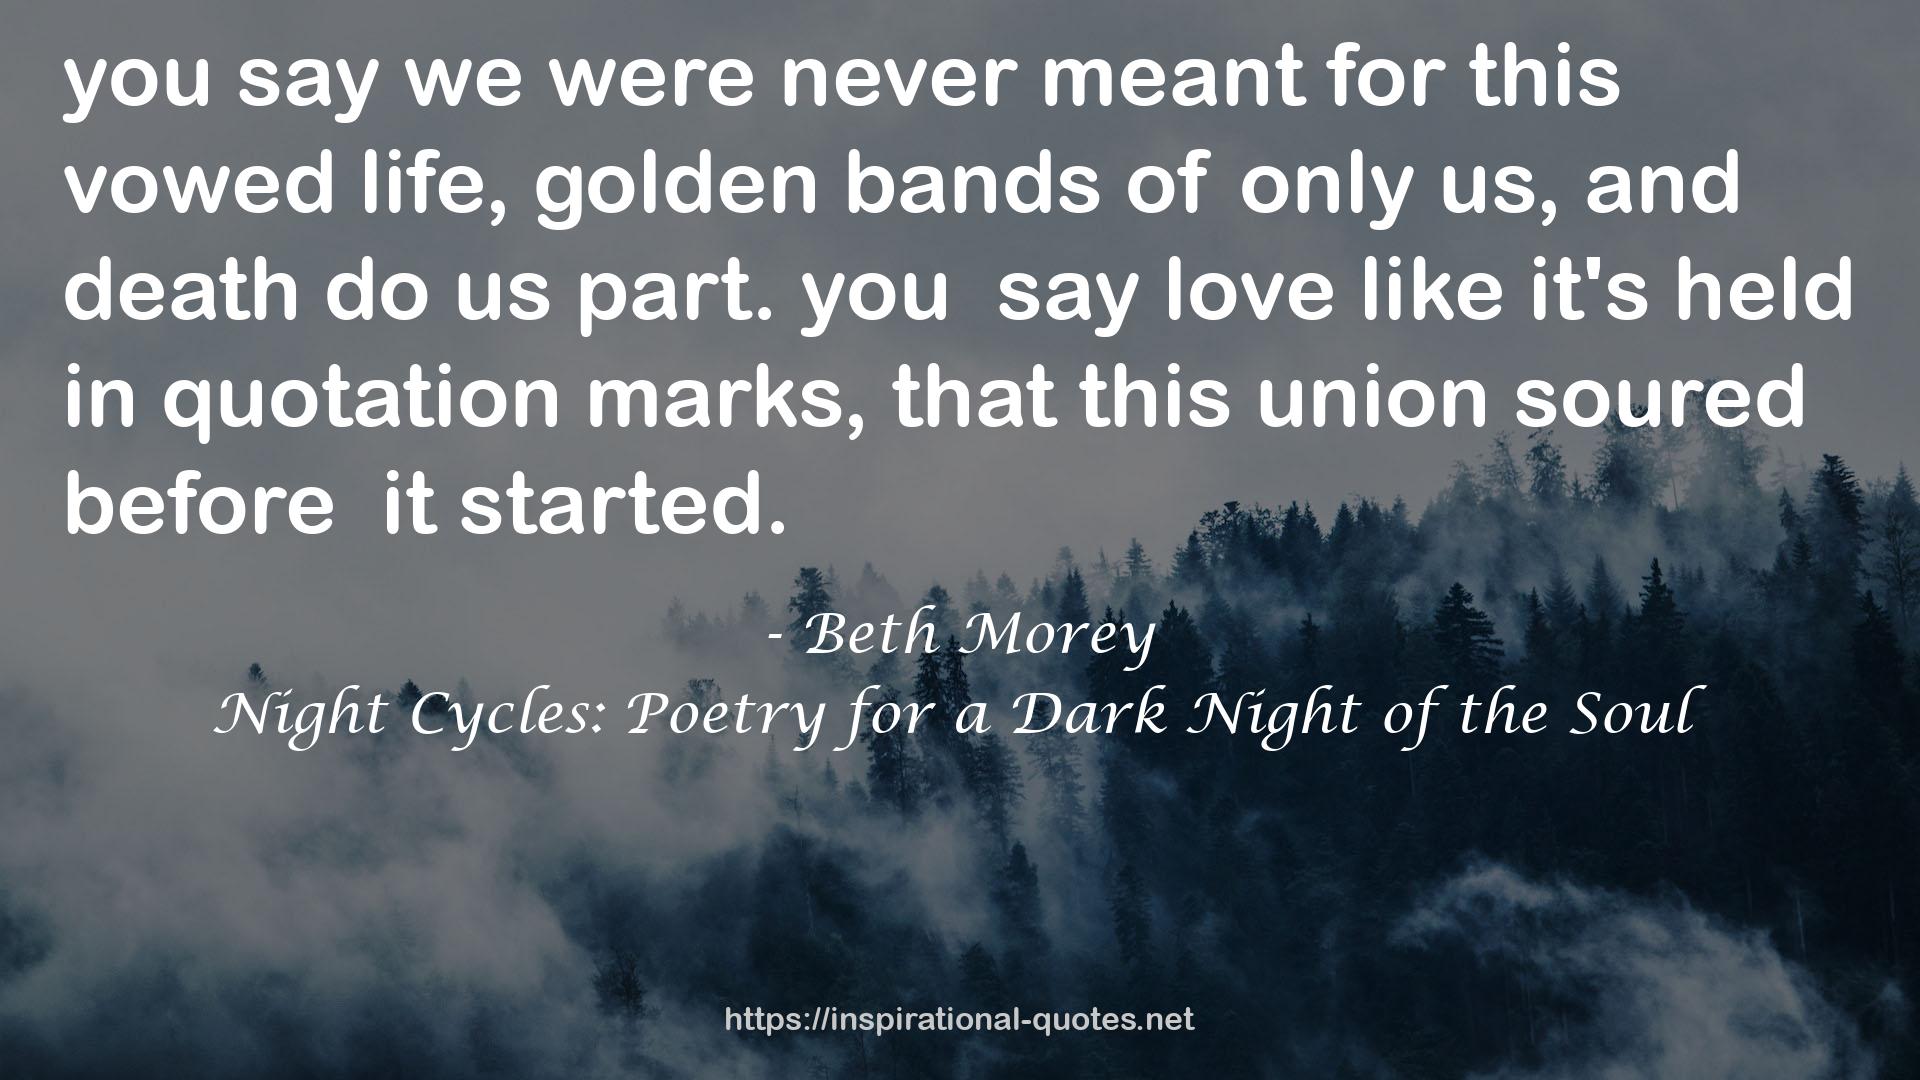 Night Cycles: Poetry for a Dark Night of the Soul QUOTES